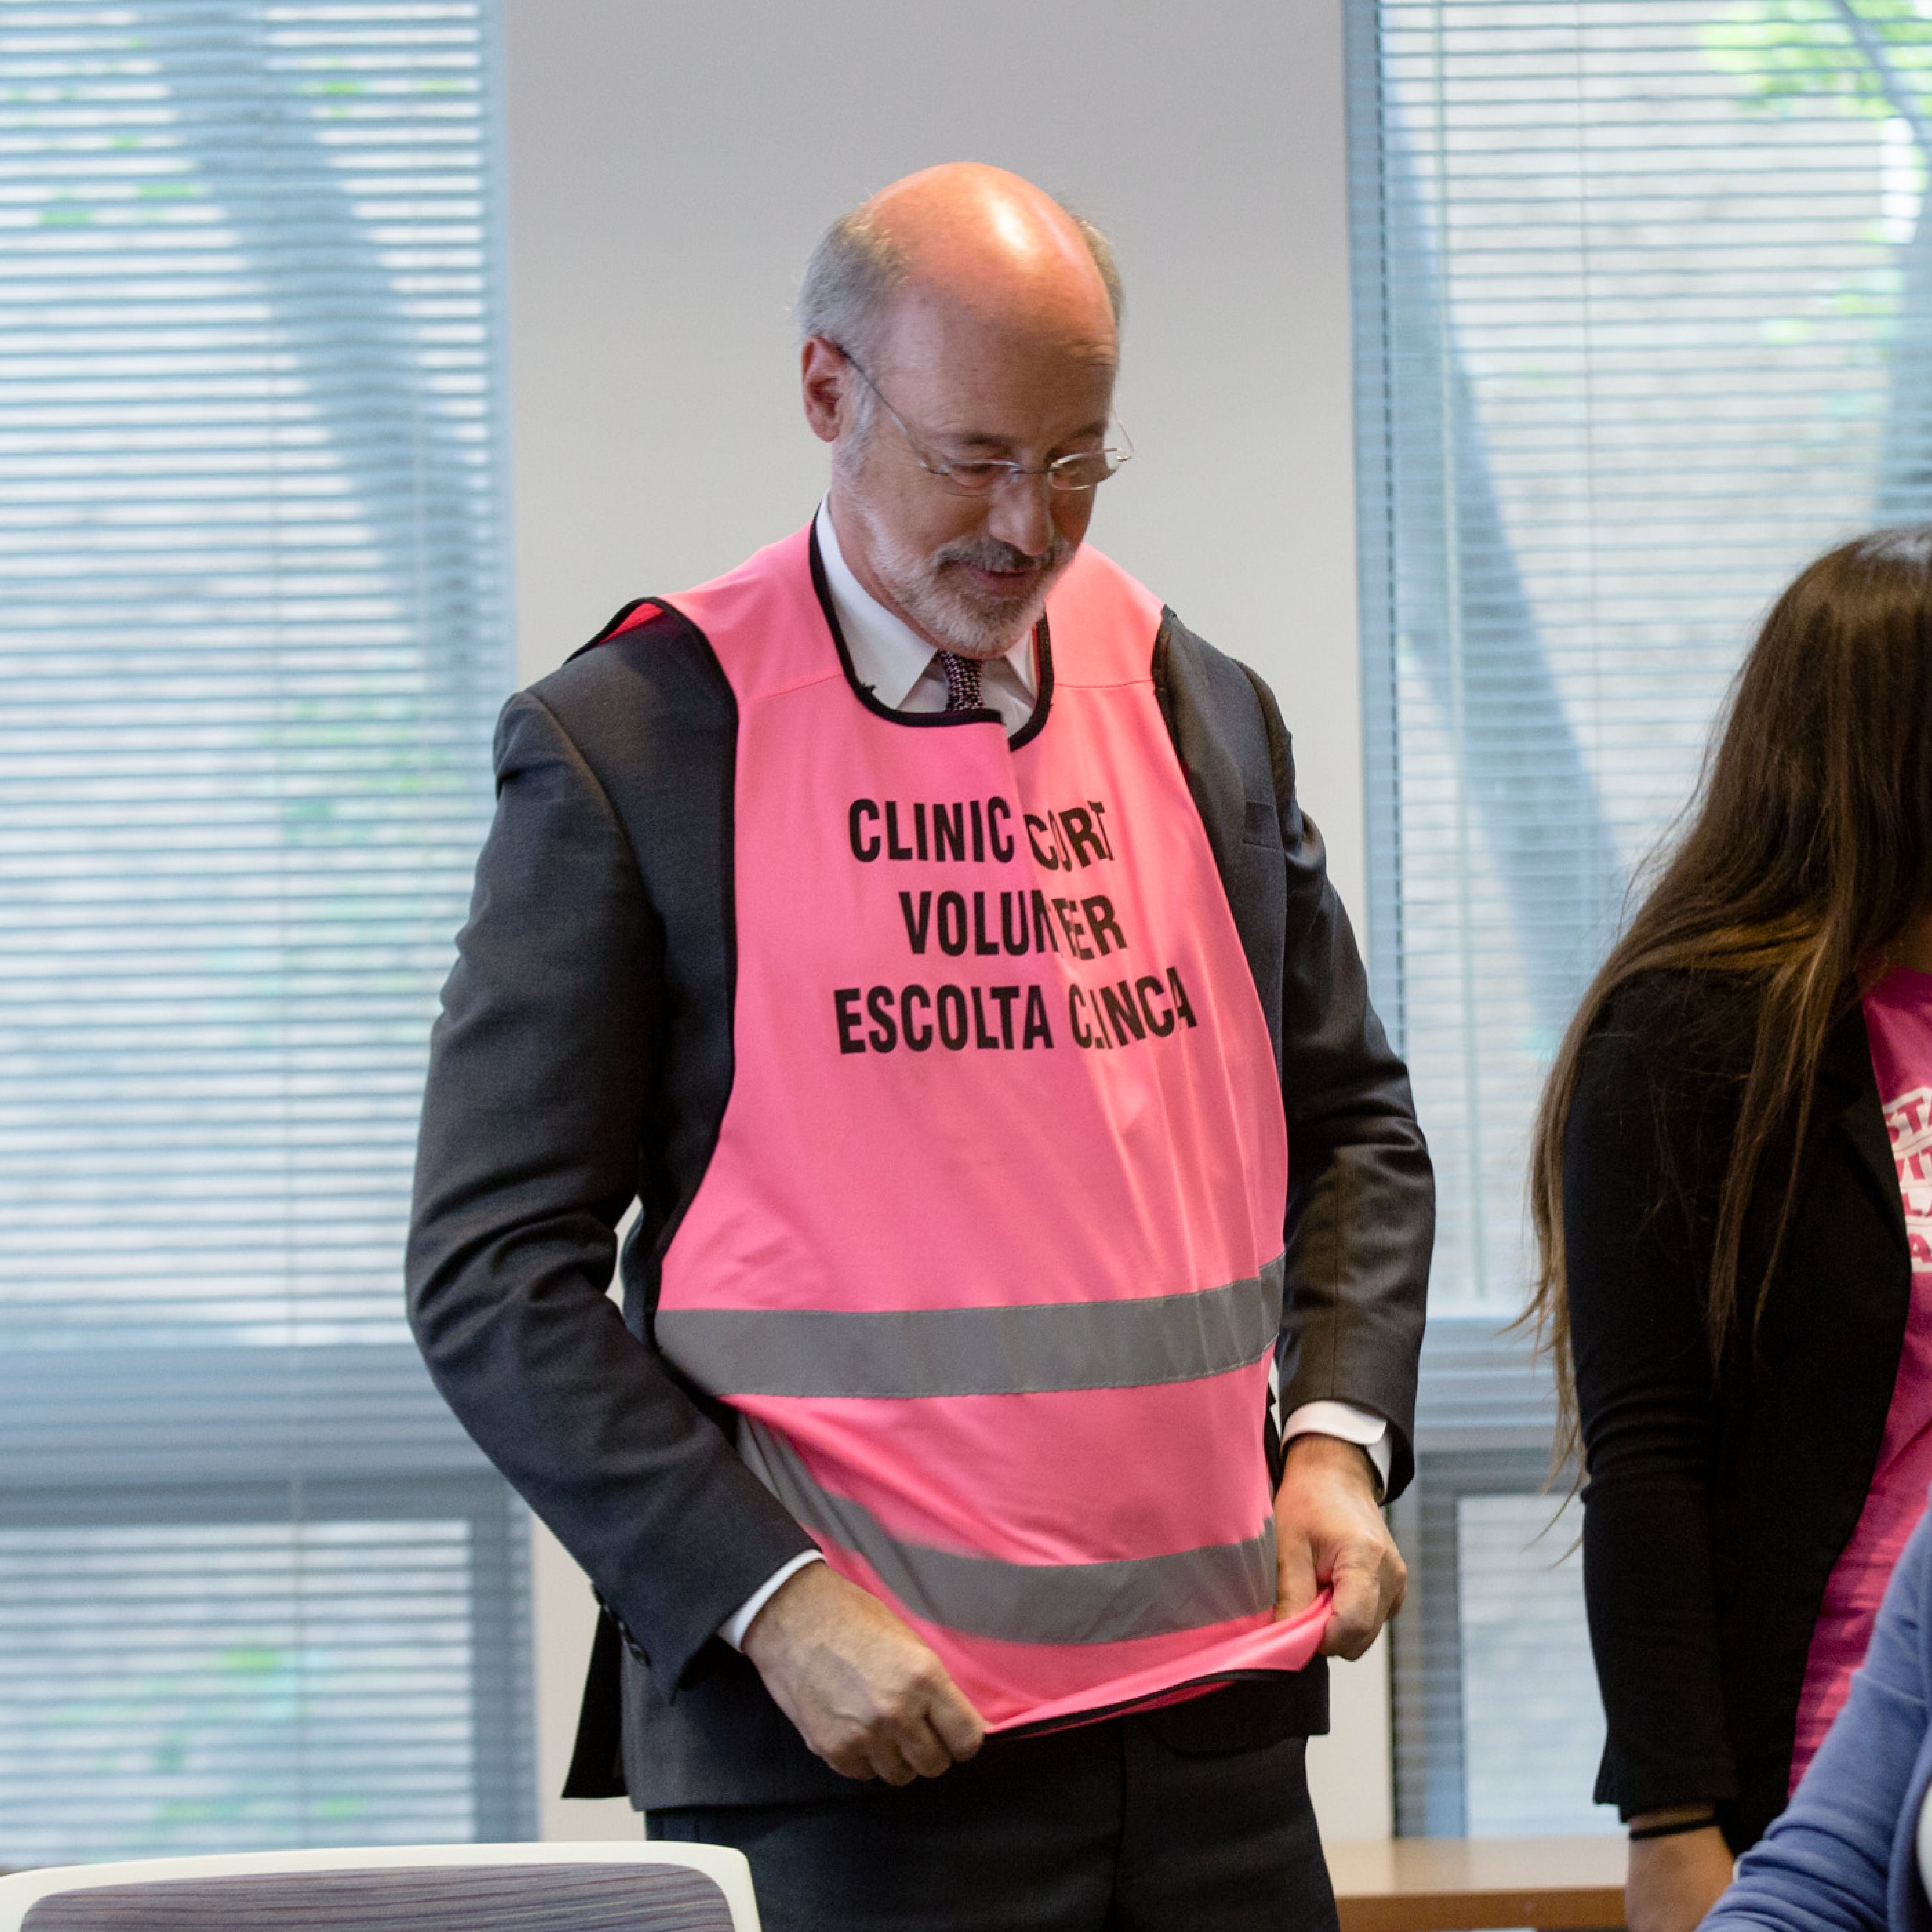 Governor Tom Wolf on Twitter "Before I was governor, I volunteered as